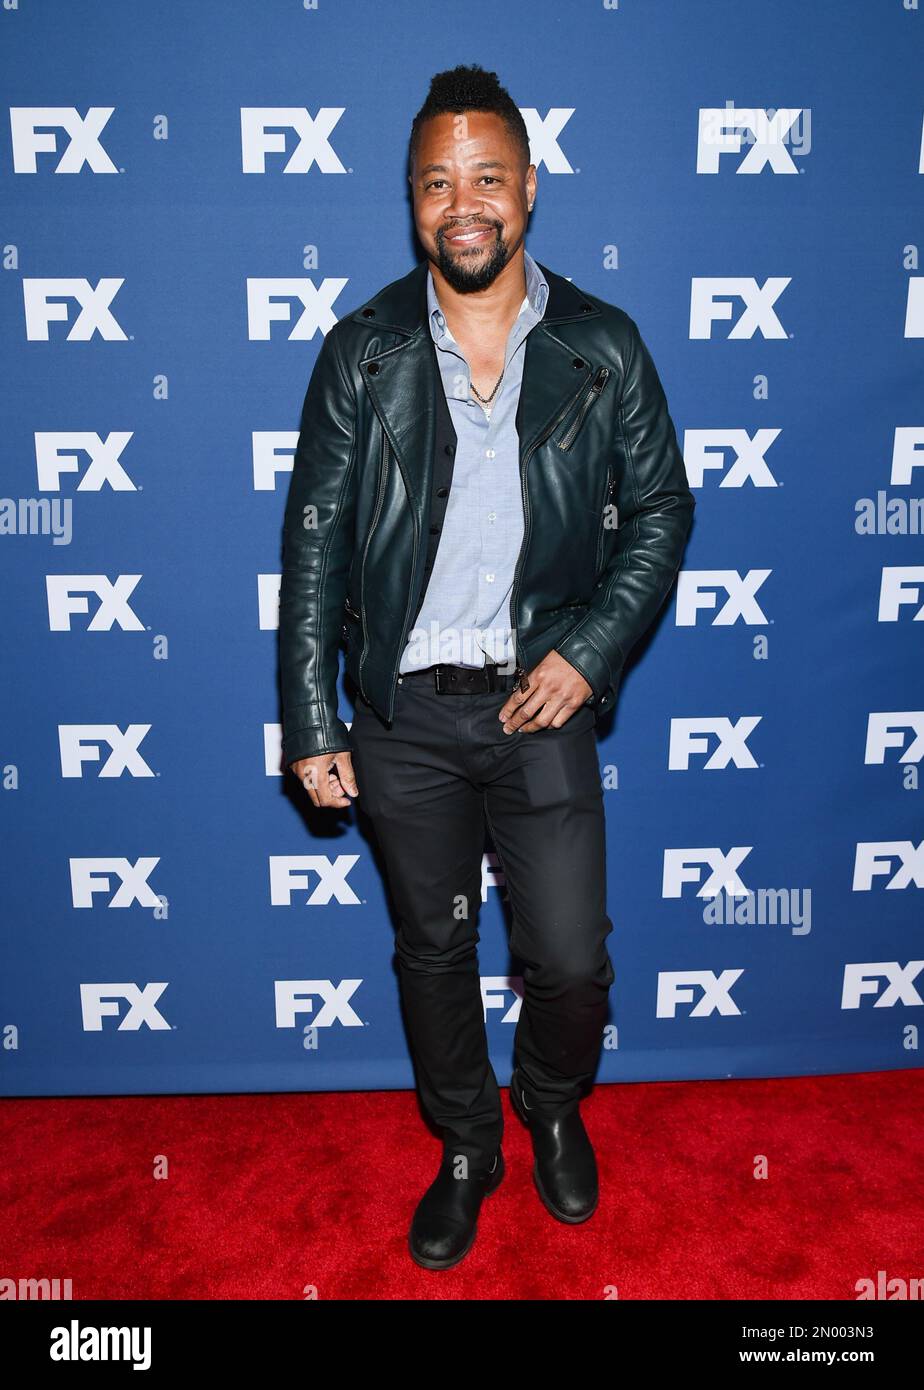 Actor Cuba Gooding Jr. attends FX Networks upfront premiere of "The People  v. O.J. Simpson: American Crime Story" at the AMC Empire 25 on Wednesday,  March 30, 2016, in New York. (Photo